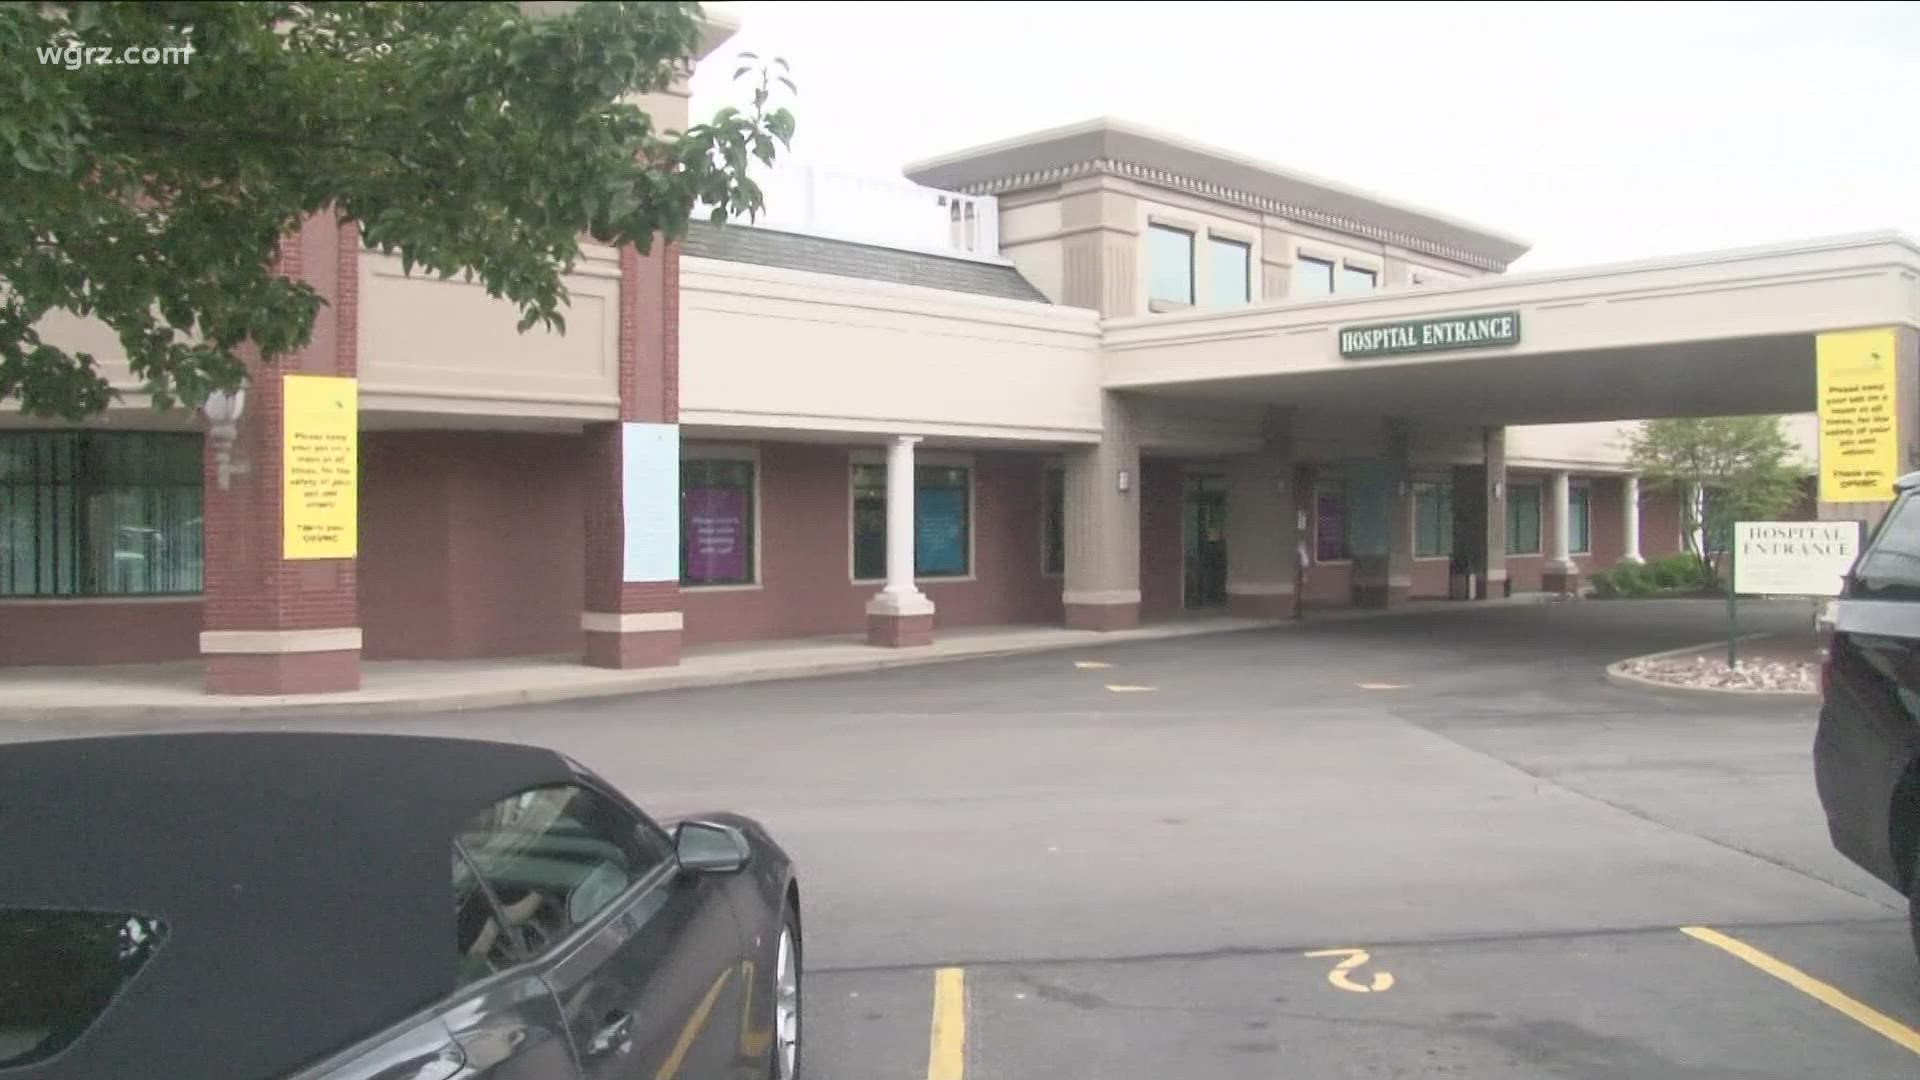 A local vet clinic says it has been seeing more unruly behavior from clients during the pandemic that has only gotten worse.